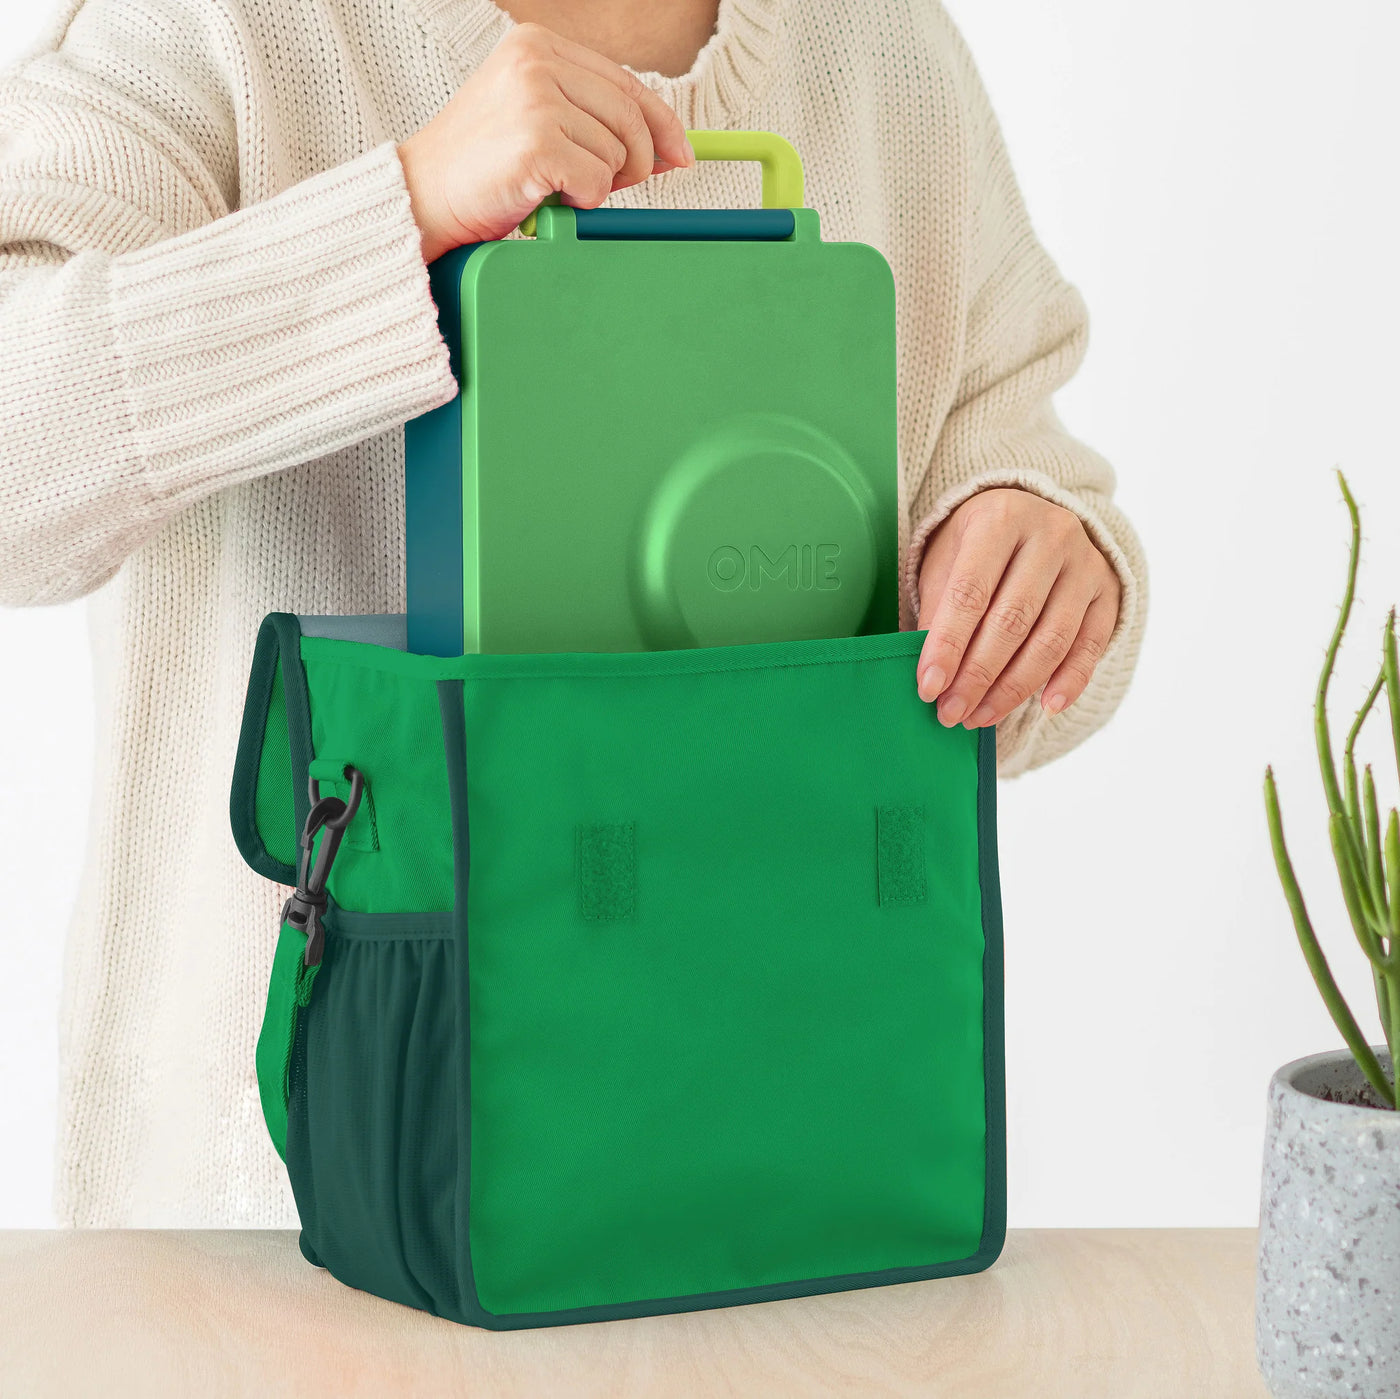 OmieTote Lunch Bag